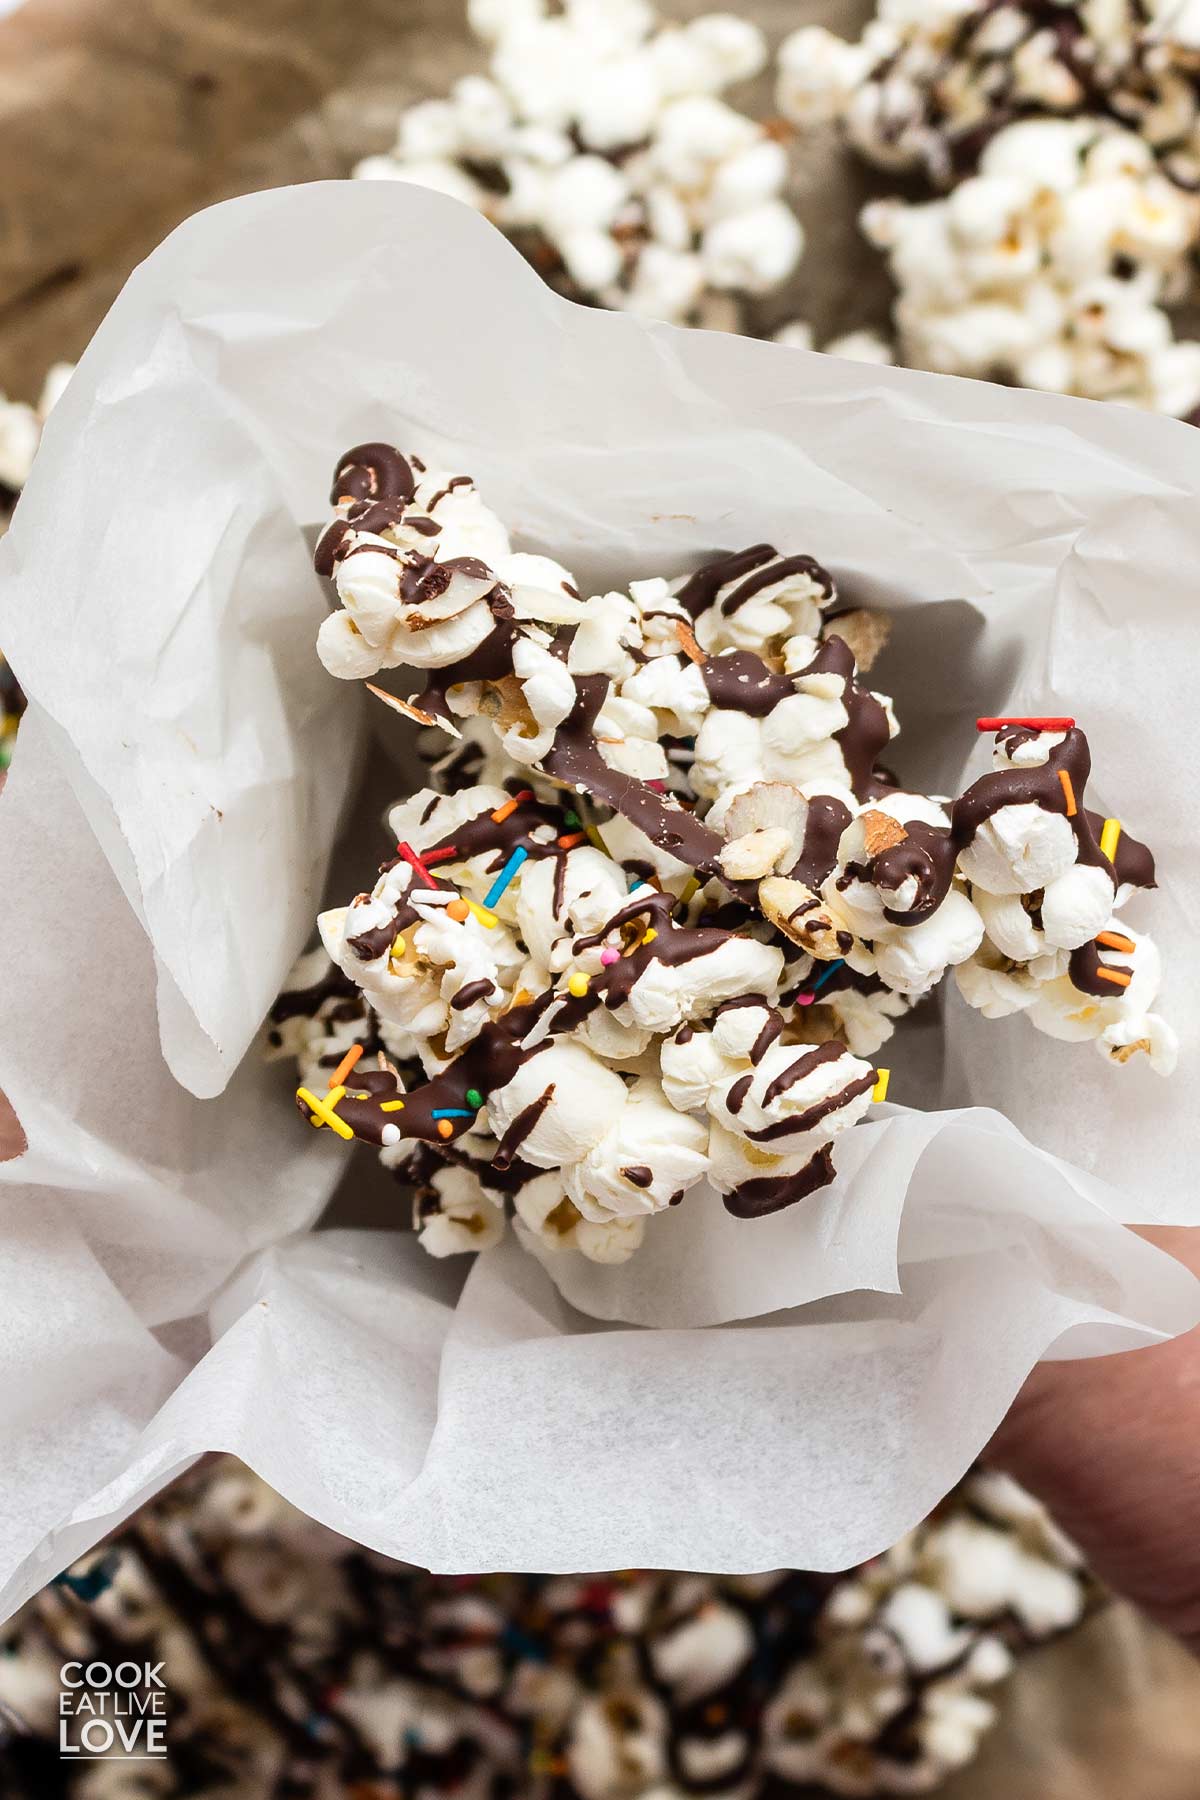 Hands holding a bucket of chocolate drizzled popcorn over the tray of prepped popcorn.